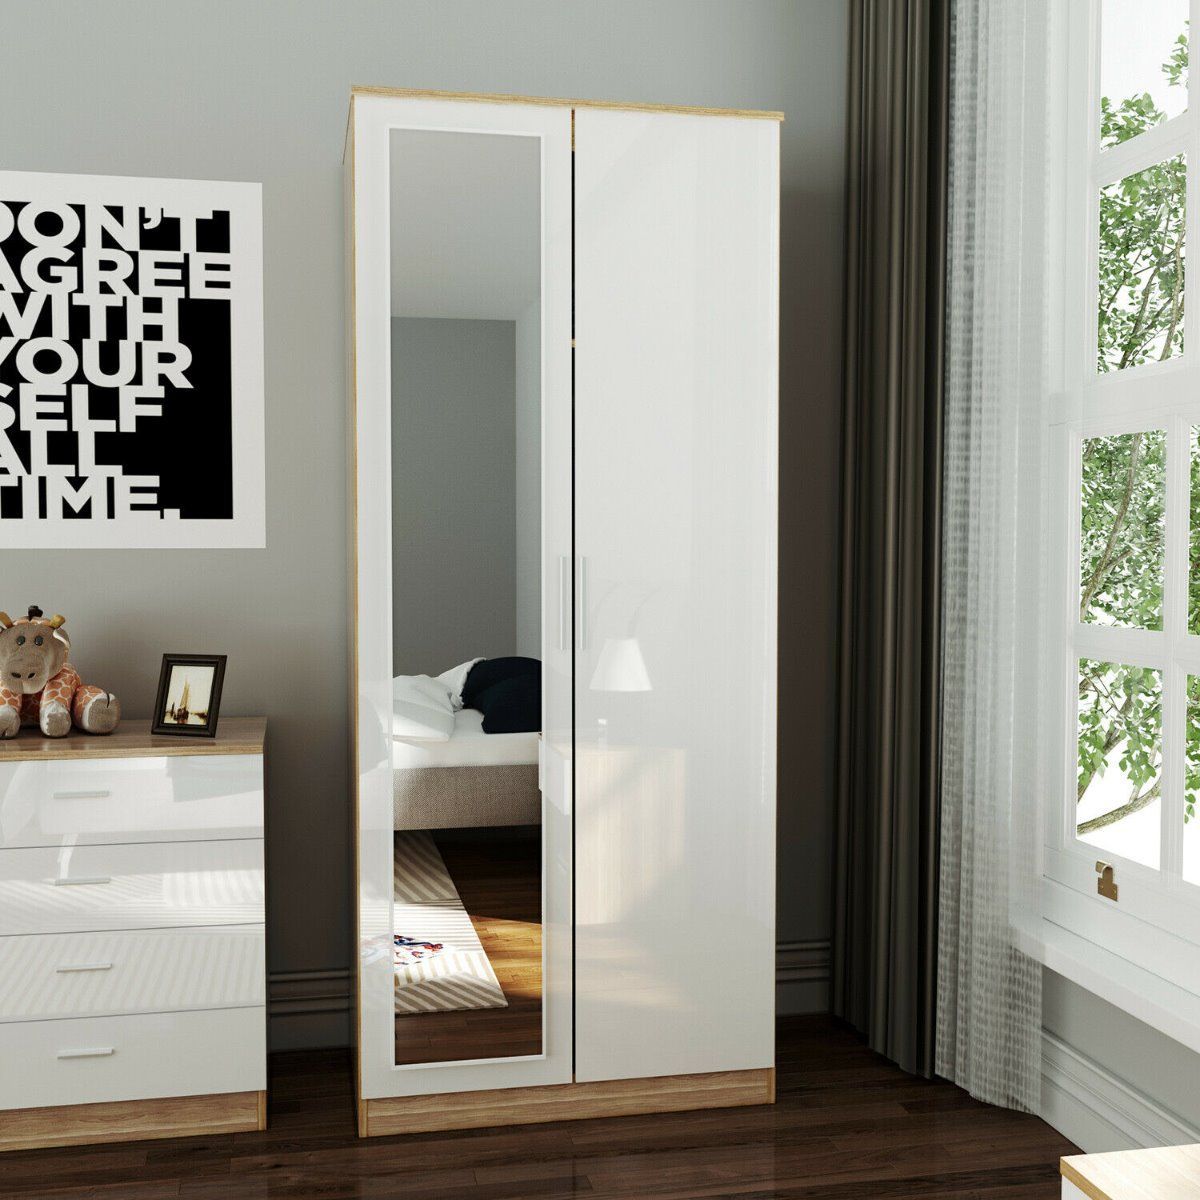 Elegant 2 Door Mirror Wardrobe In White And Oak Finish Soft Close Hinged  Doors With Regard To Single White Wardrobes With Drawers (View 11 of 15)